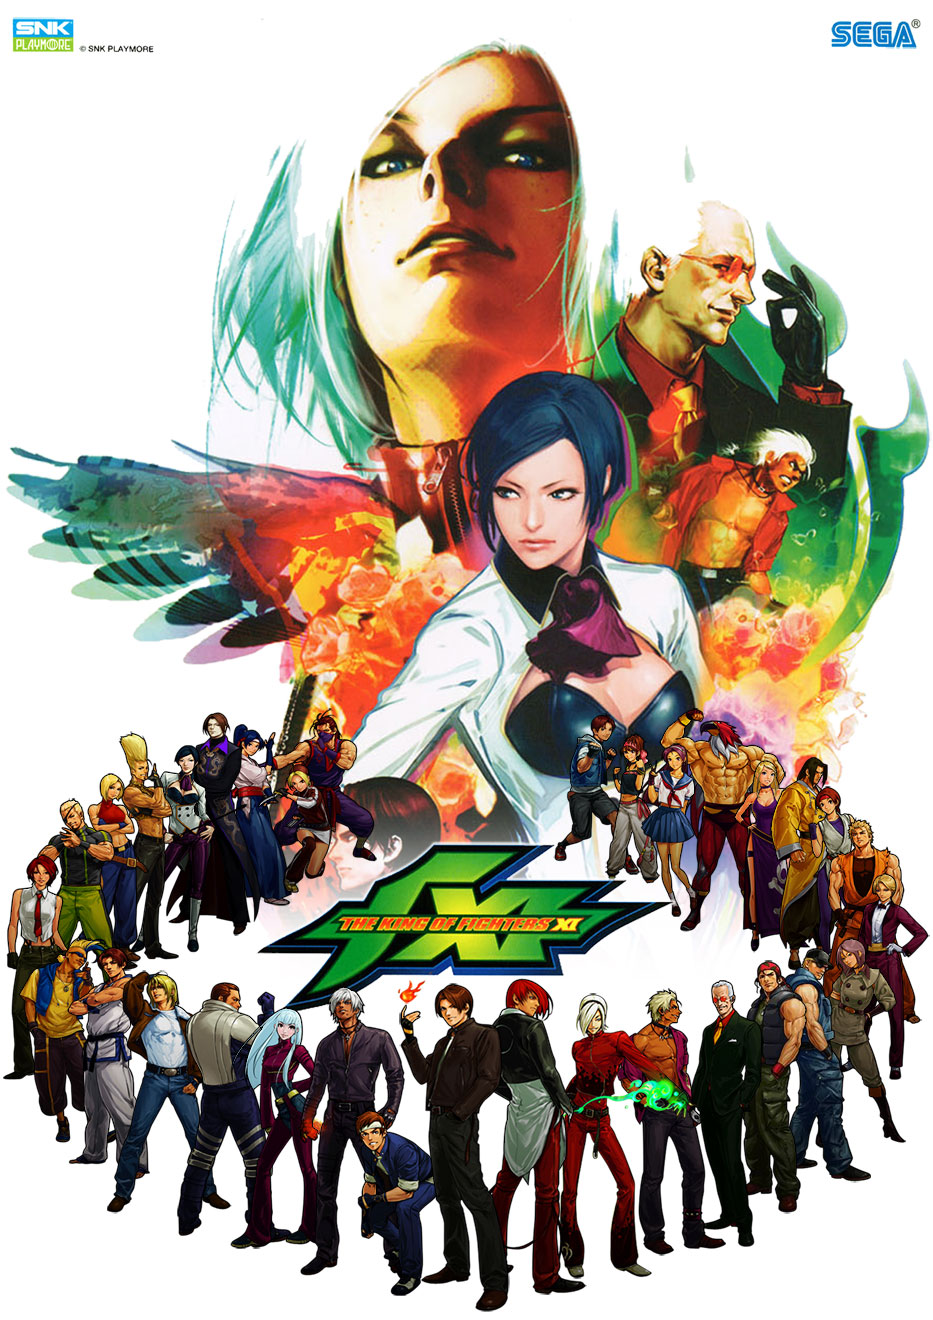 The King of Fighters 2002 (Original Soundtrack) - Album by SNK